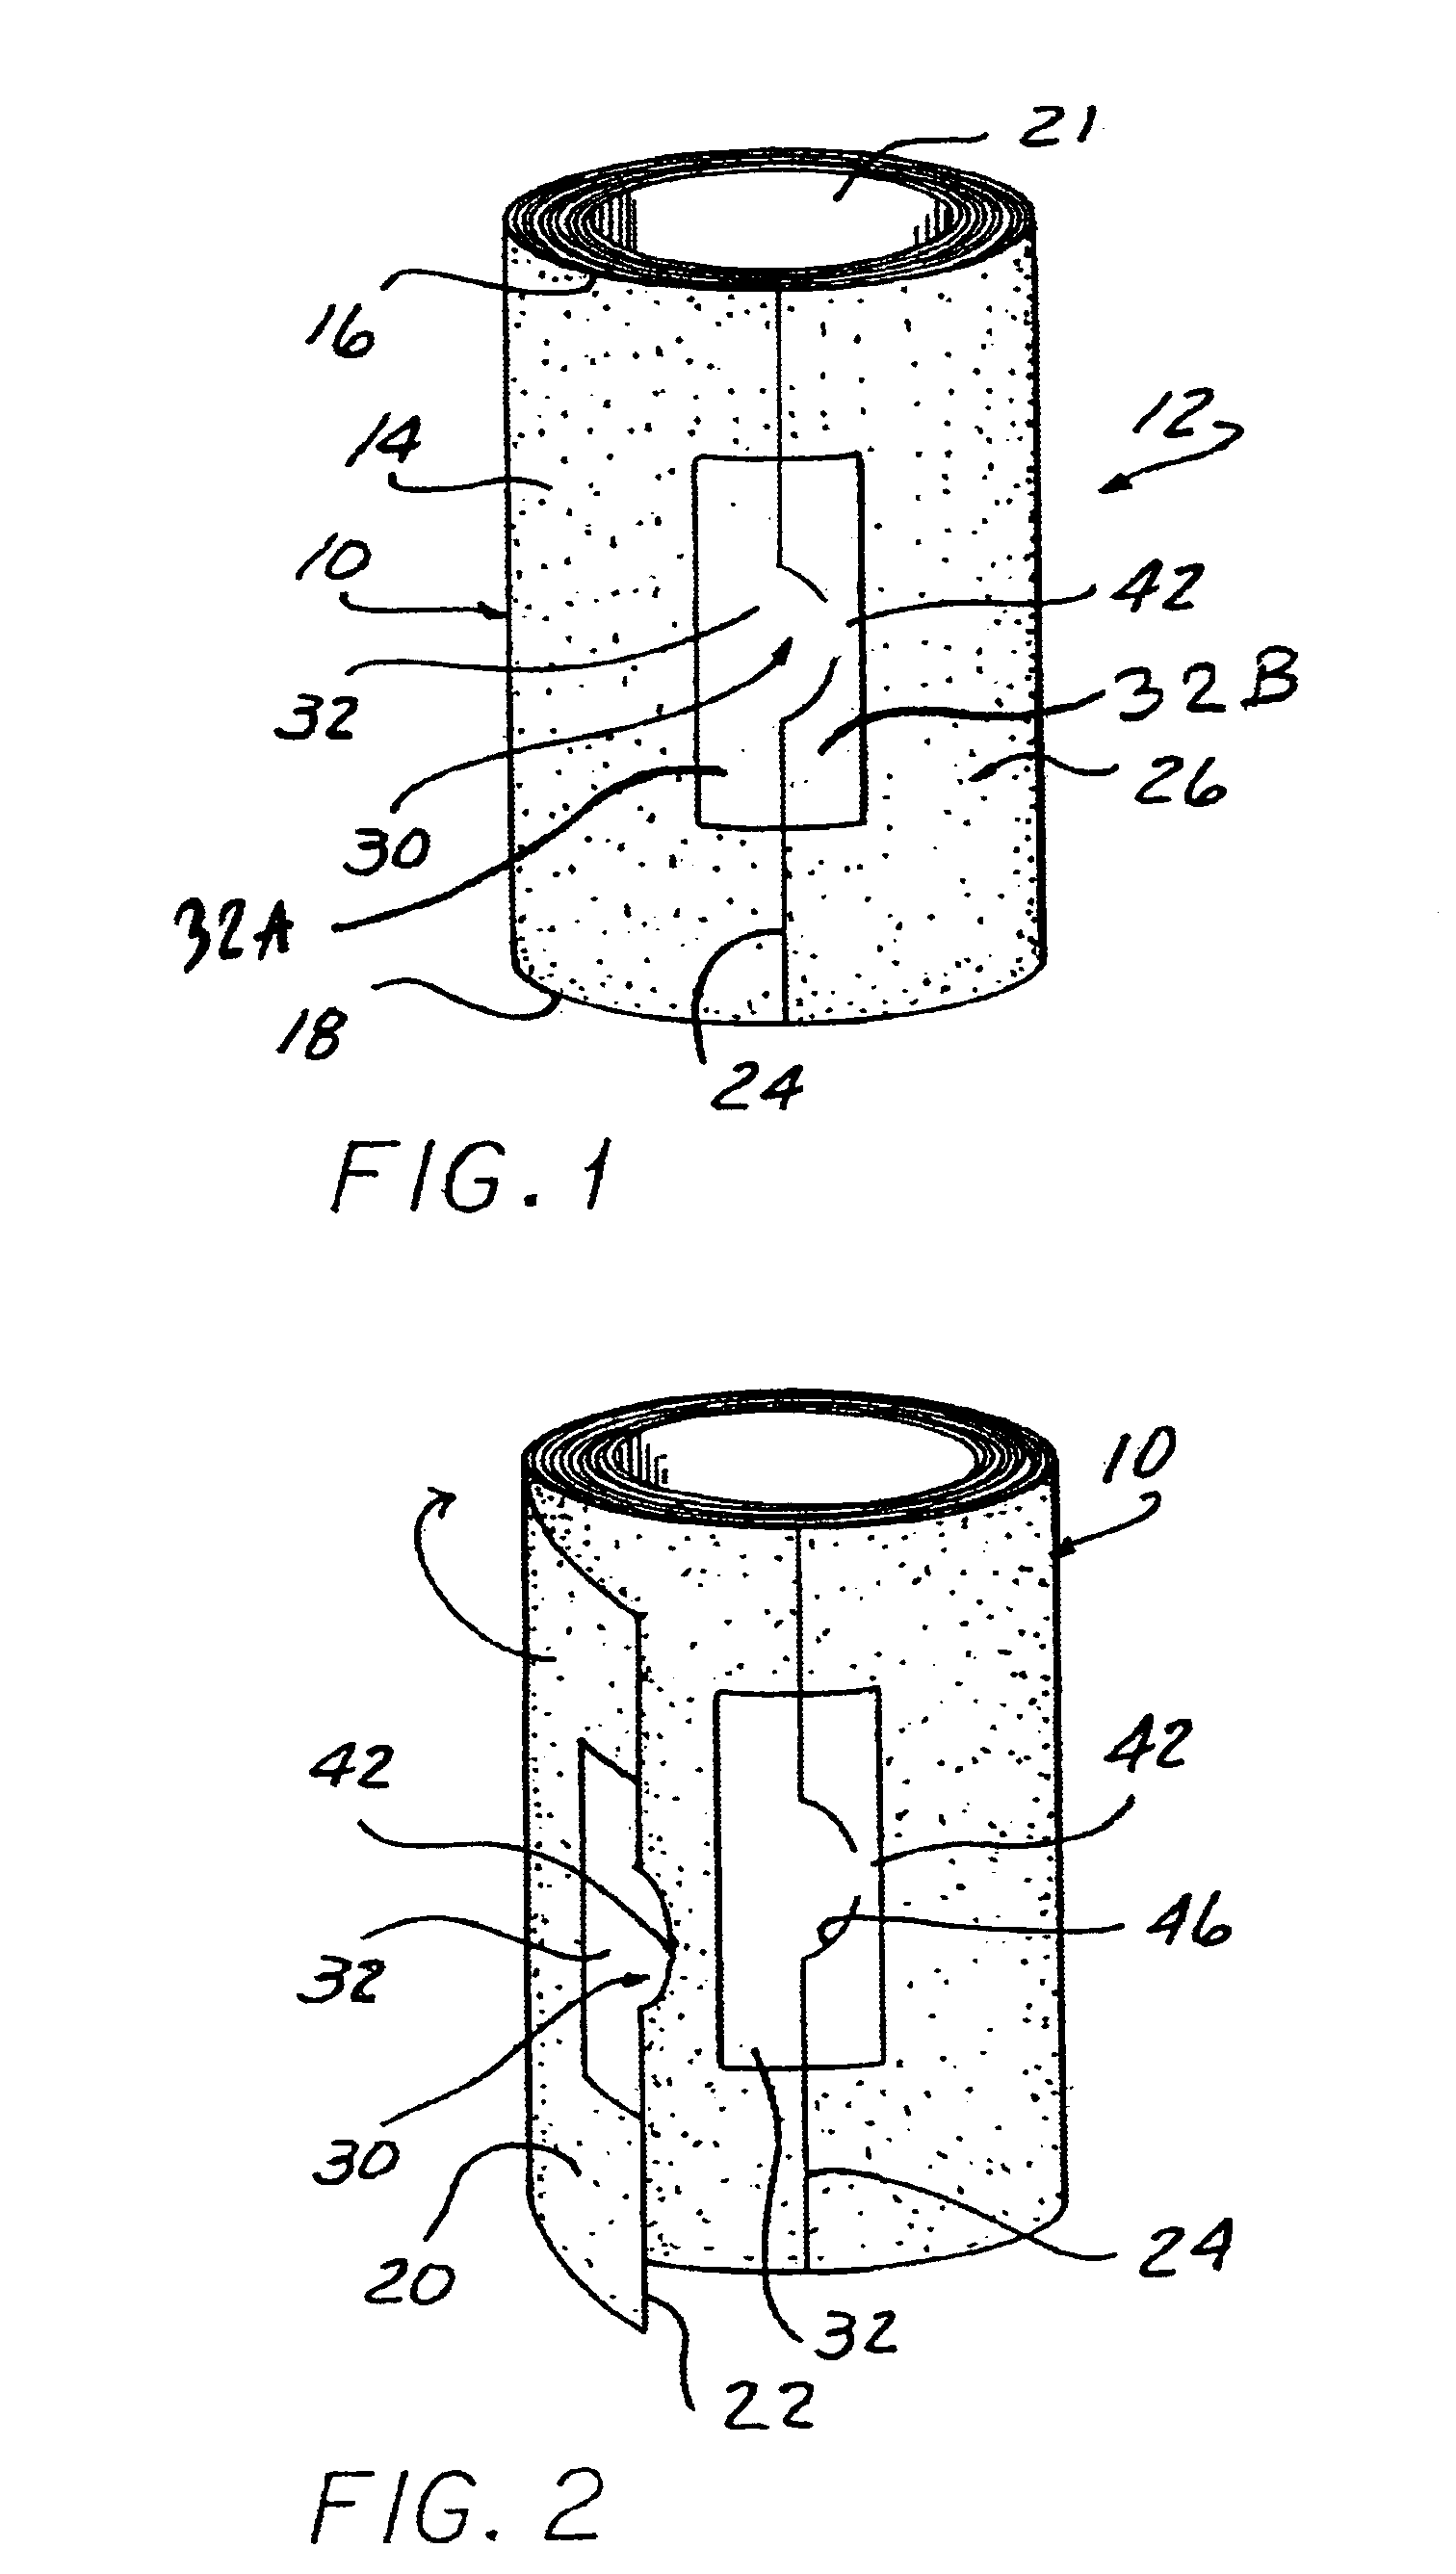 Lint removal apparatus with pull tab for adhesive coated sheets